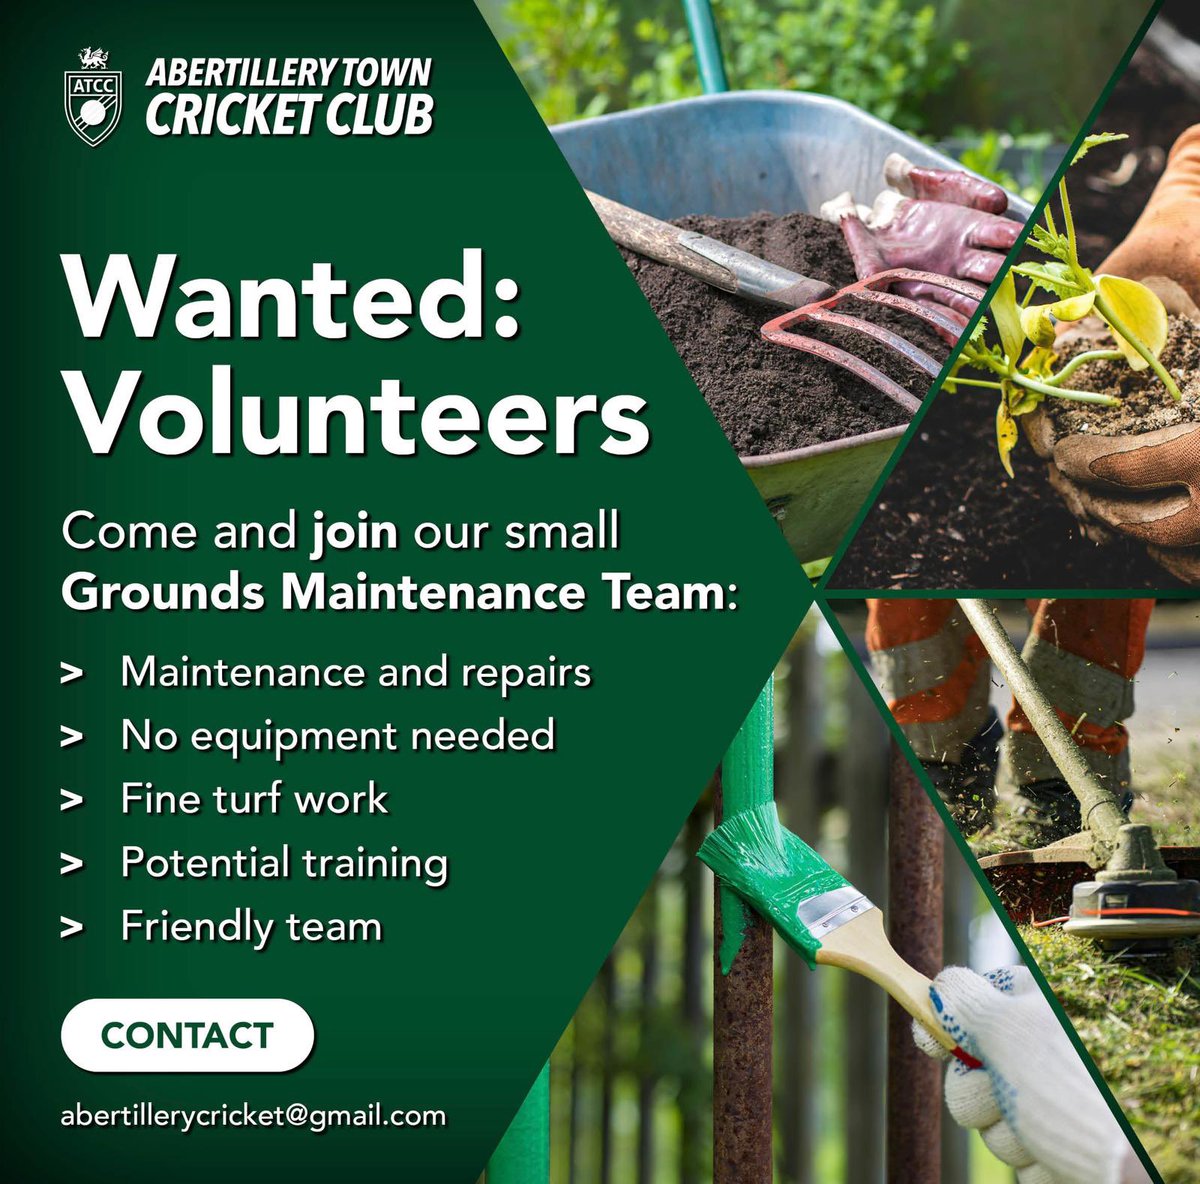 Great opportunity for anyone retired / have the spare time in #Abertillery. The #ATCC grounds maintenance team are looking to expand their work on our beautiful little corner of Abertillery Park and its environs. Please get in touch if you’d like to contribute to the team 🏏